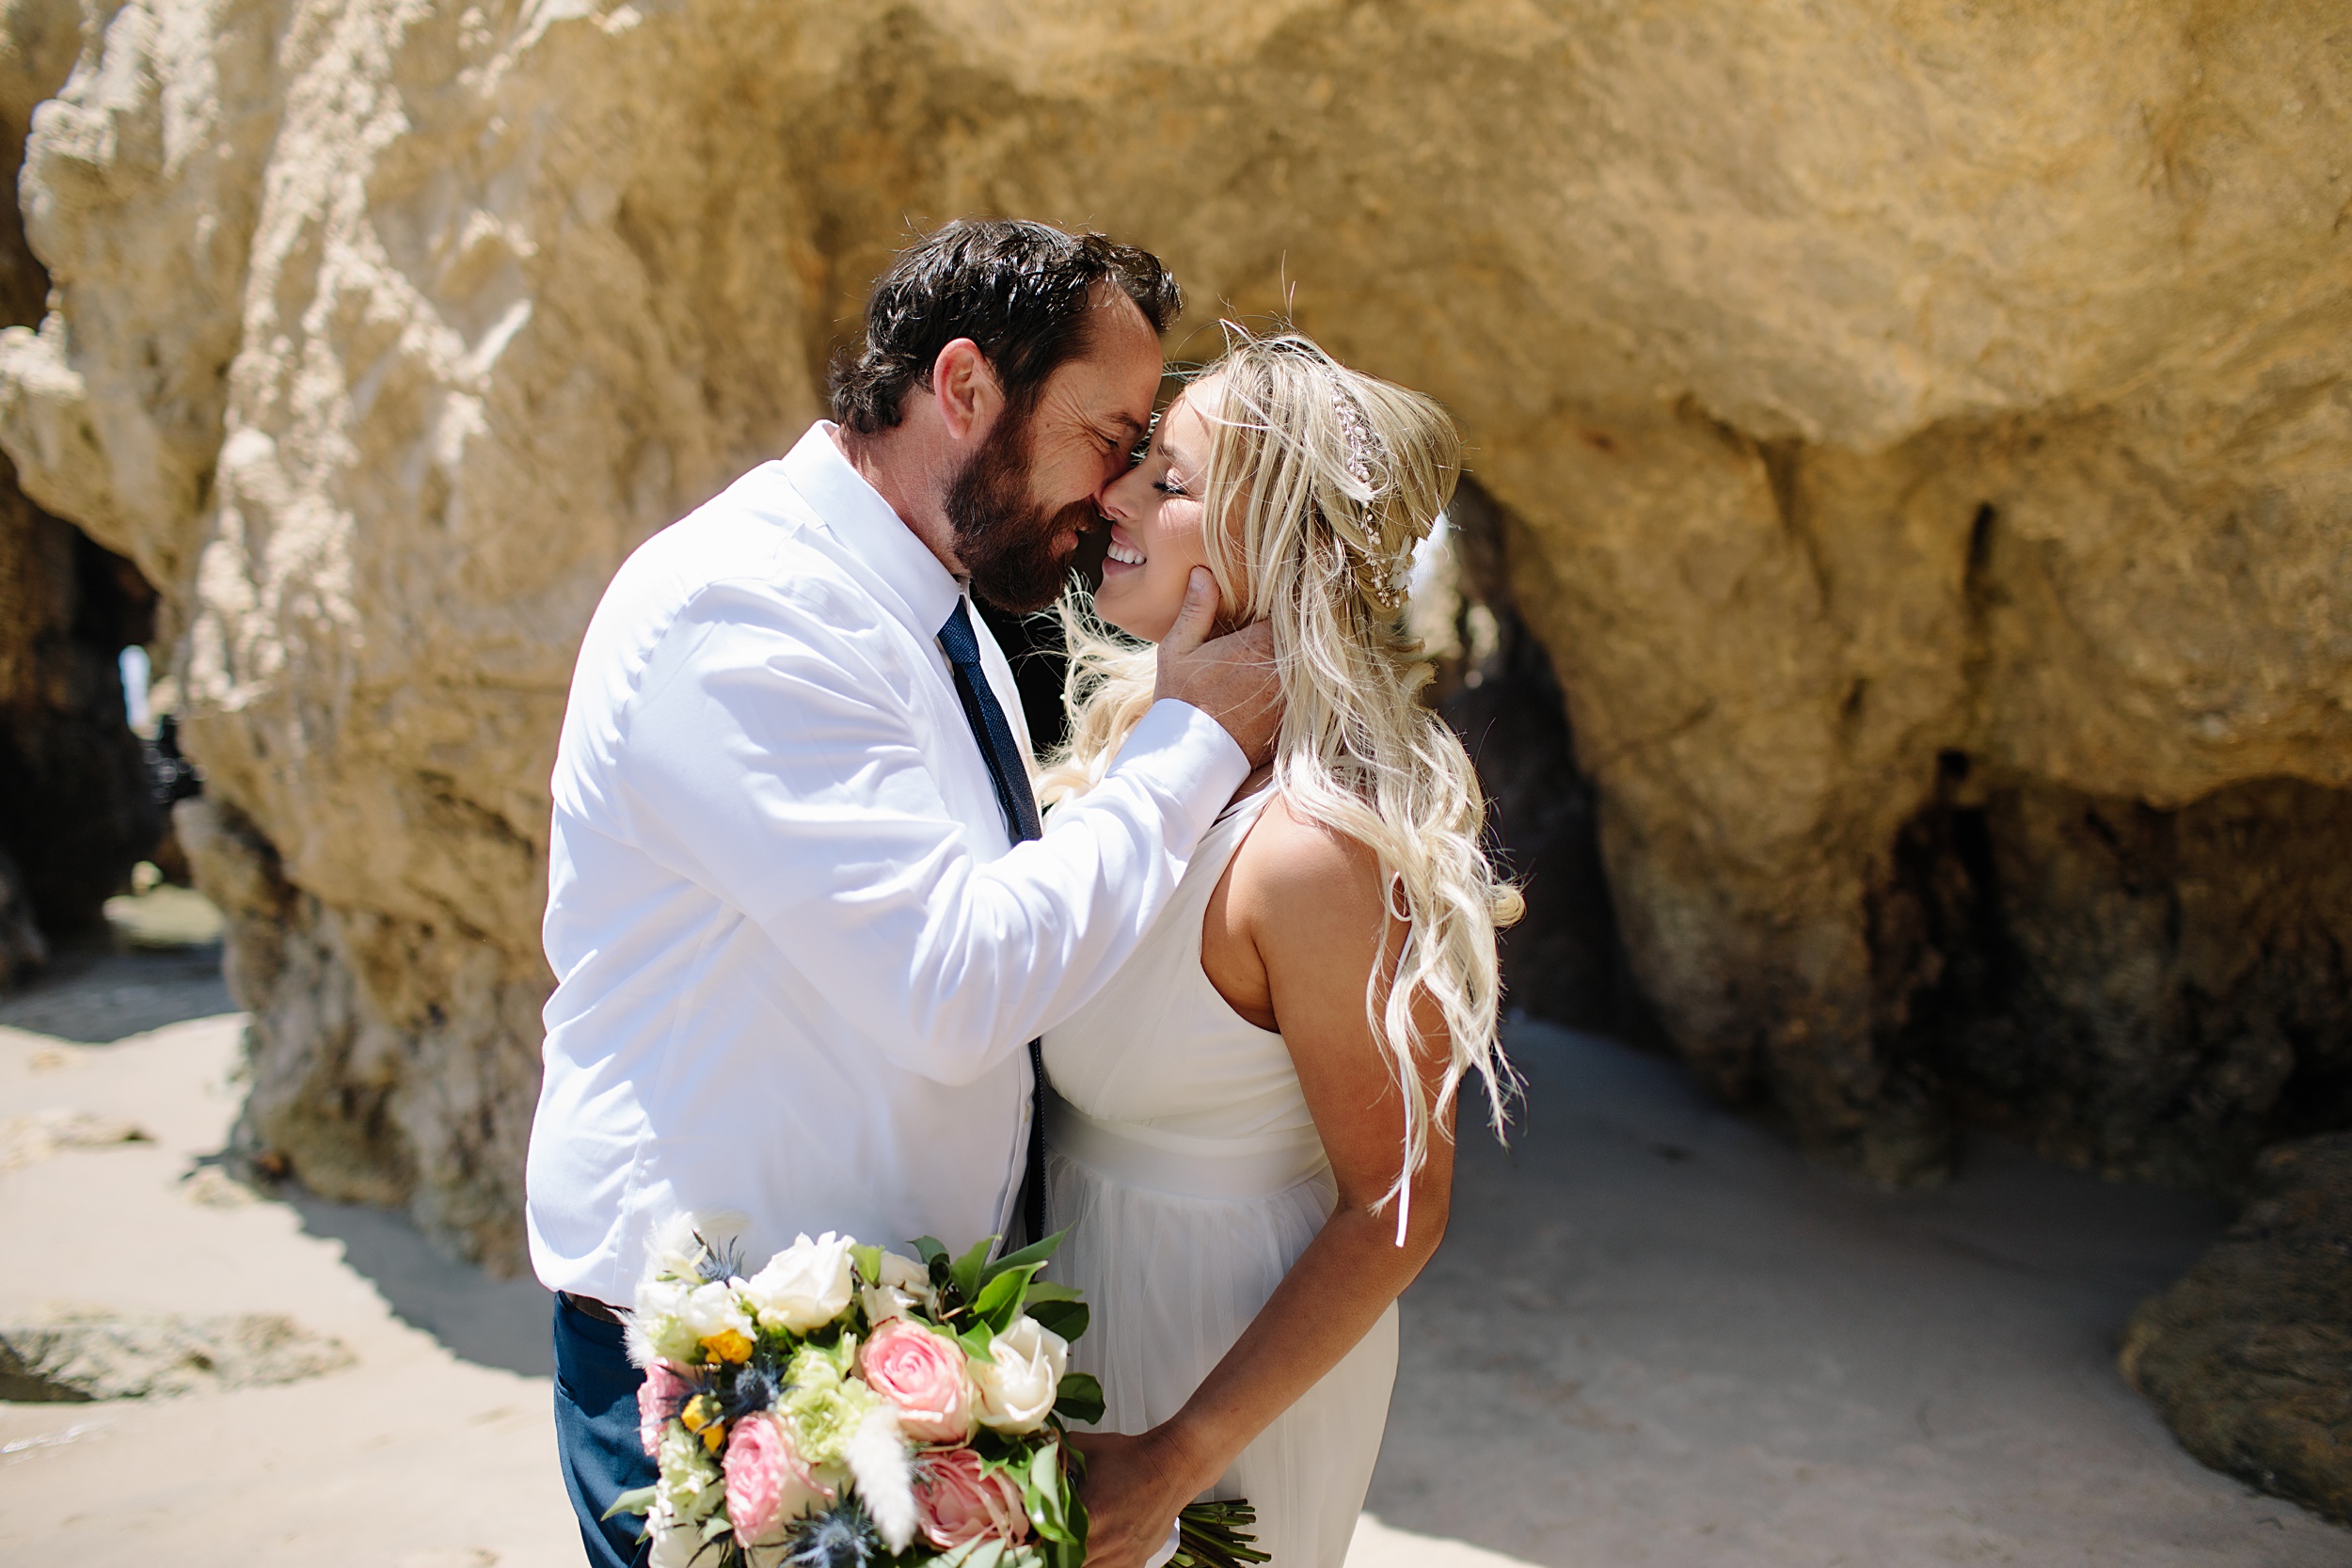 Nicole-and-Russell_0039 Breezy Los Angeles Beach Elopement in Rocky Sea Caves